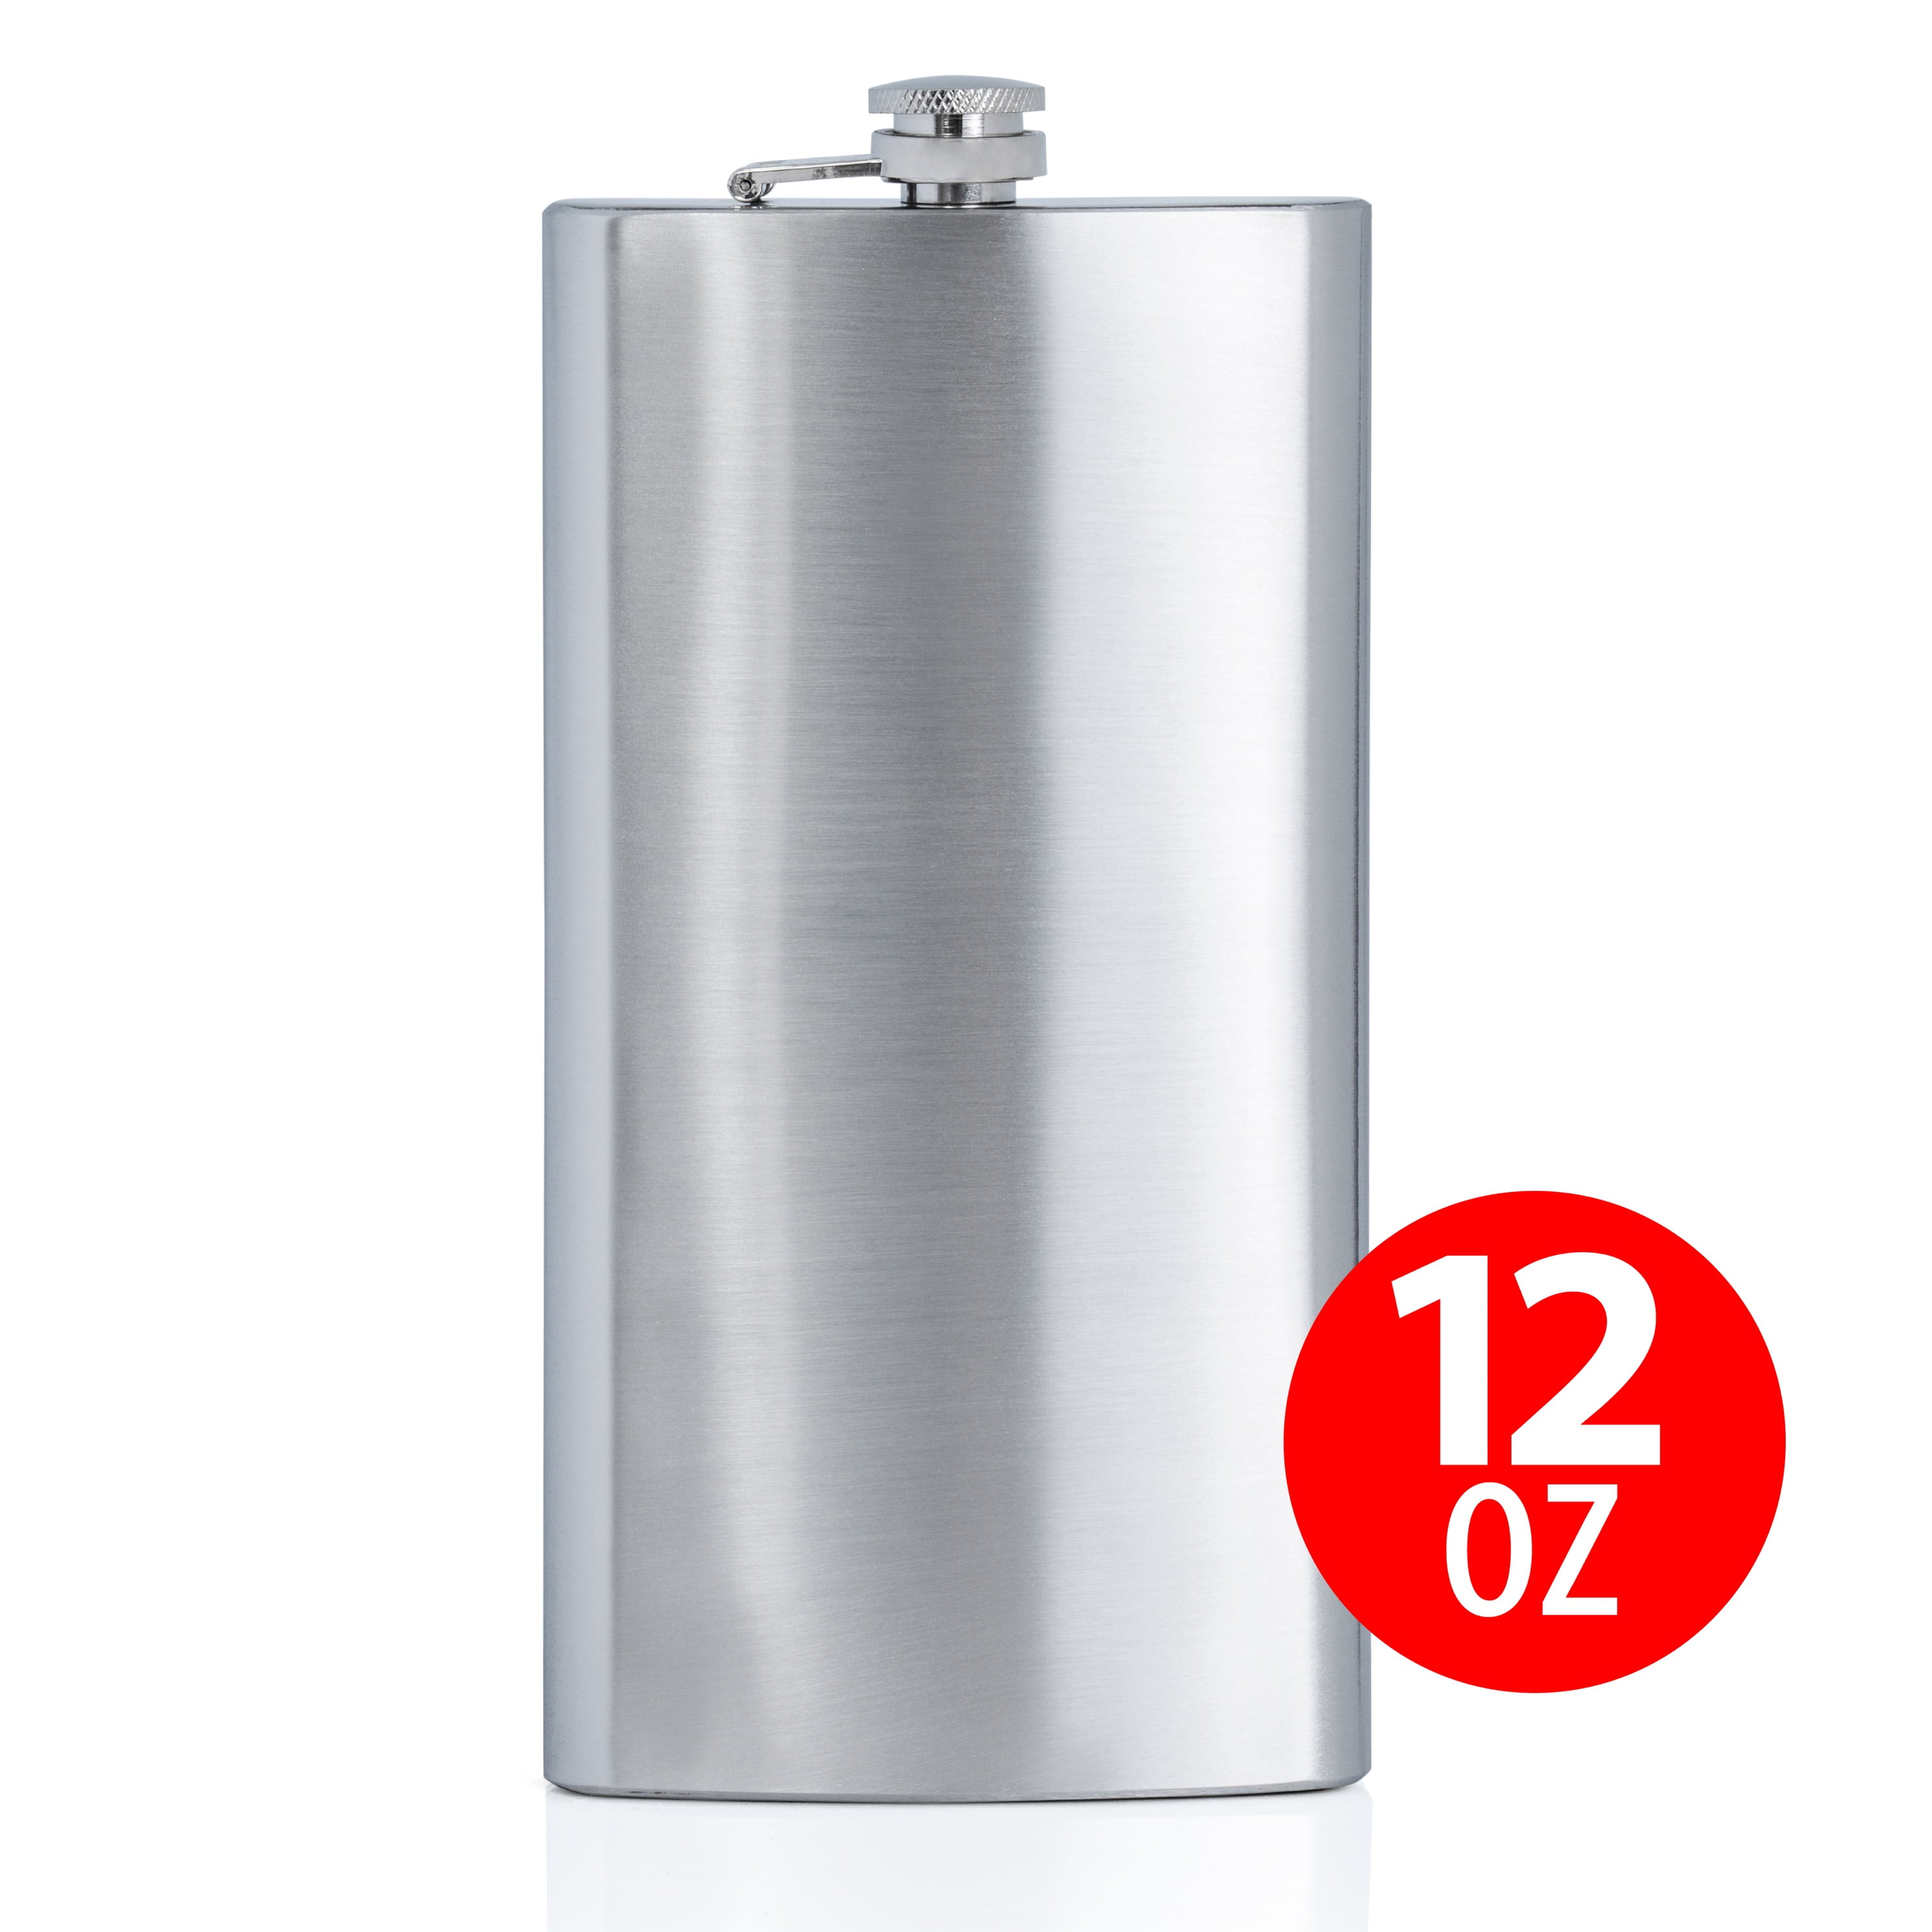 Set of 8 FF Elaine Stainless Steel Flasks,Easy Pour Funnel is Included 6 Oz